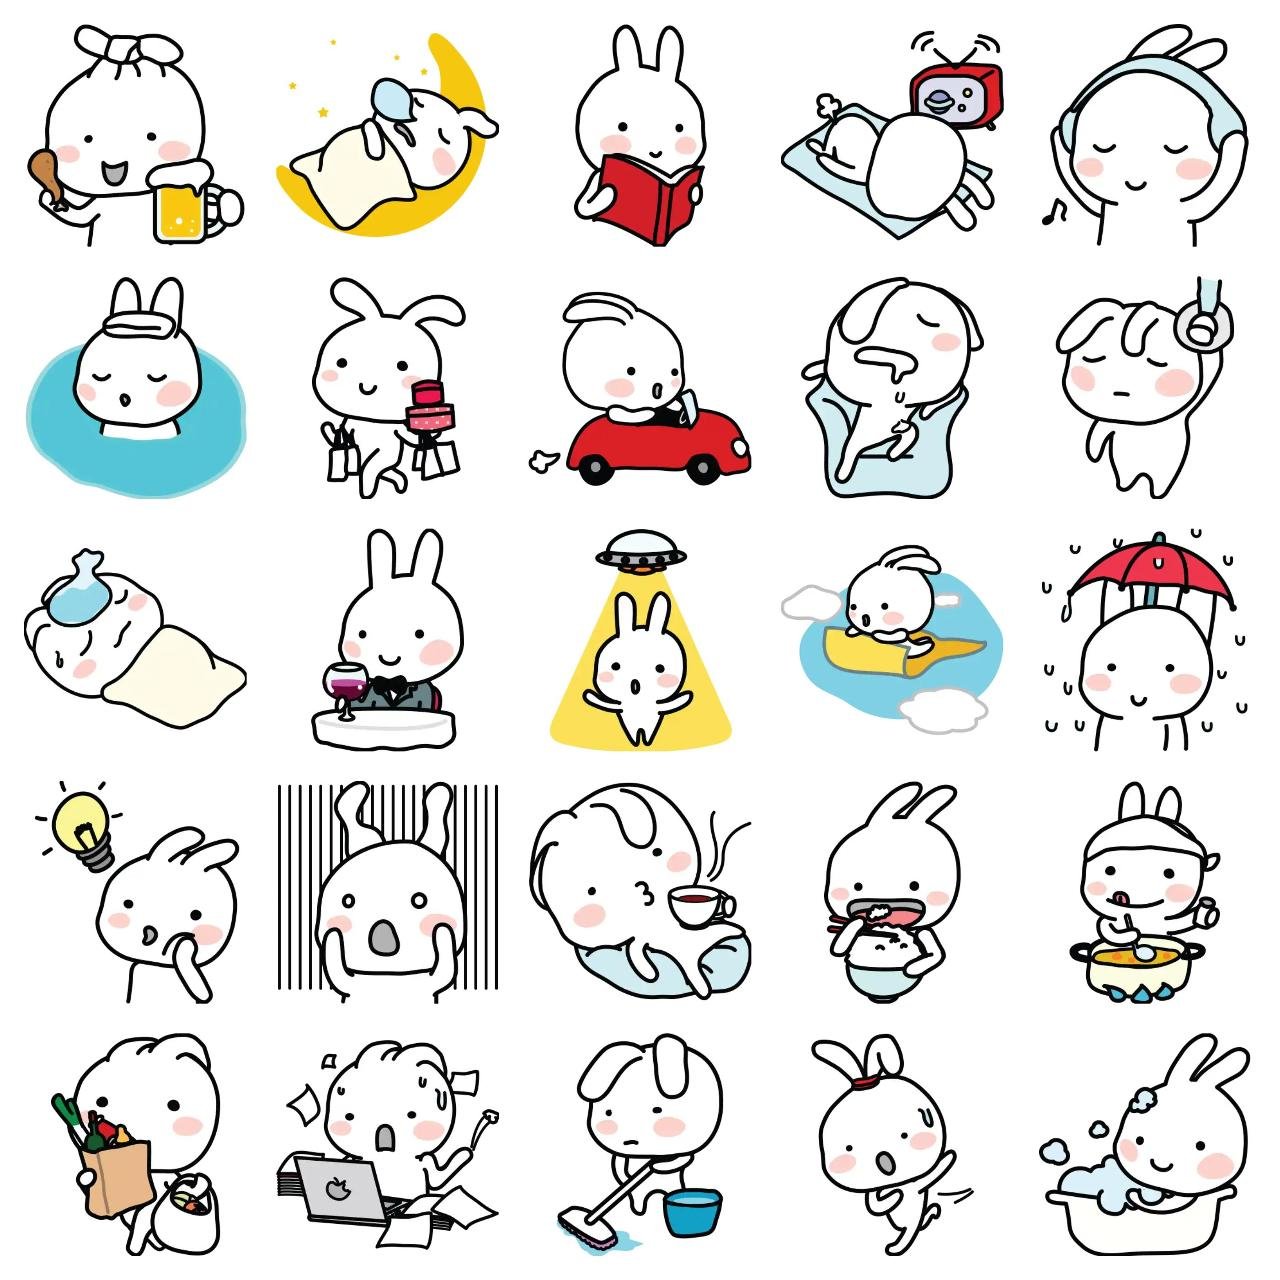 Toto 2 Animals,Etc. sticker pack for Whatsapp, Telegram, Signal, and others chatting and message apps